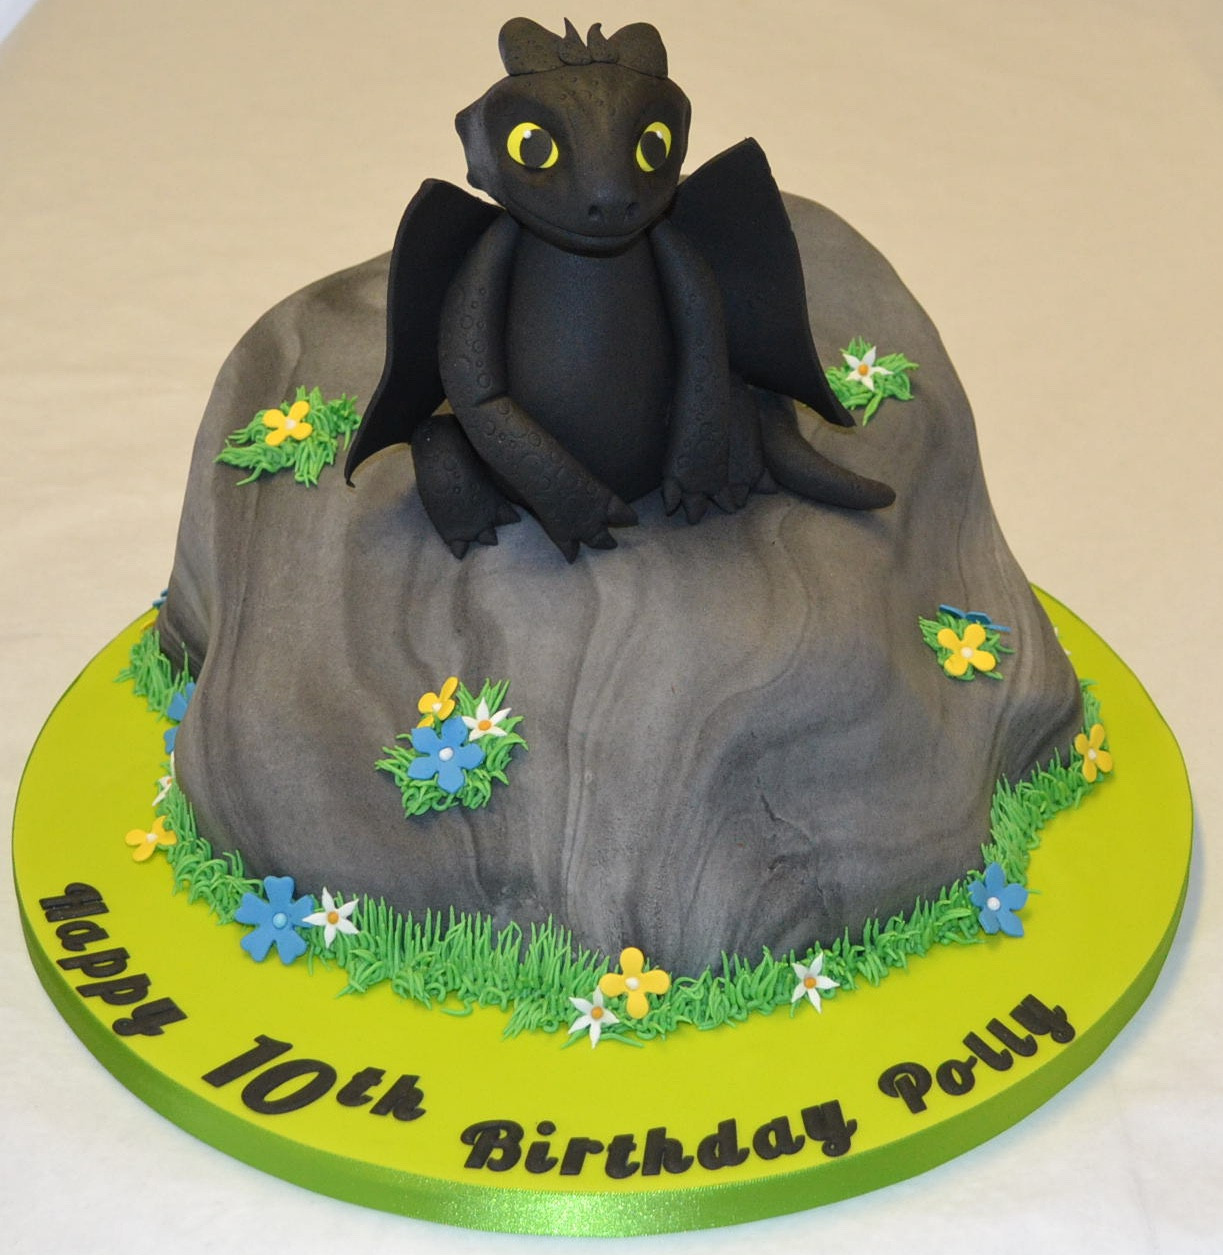 How To Train Your Dragon Birthday Cake
 How To Train Your Dragon Cake Boys Birthday Cakes